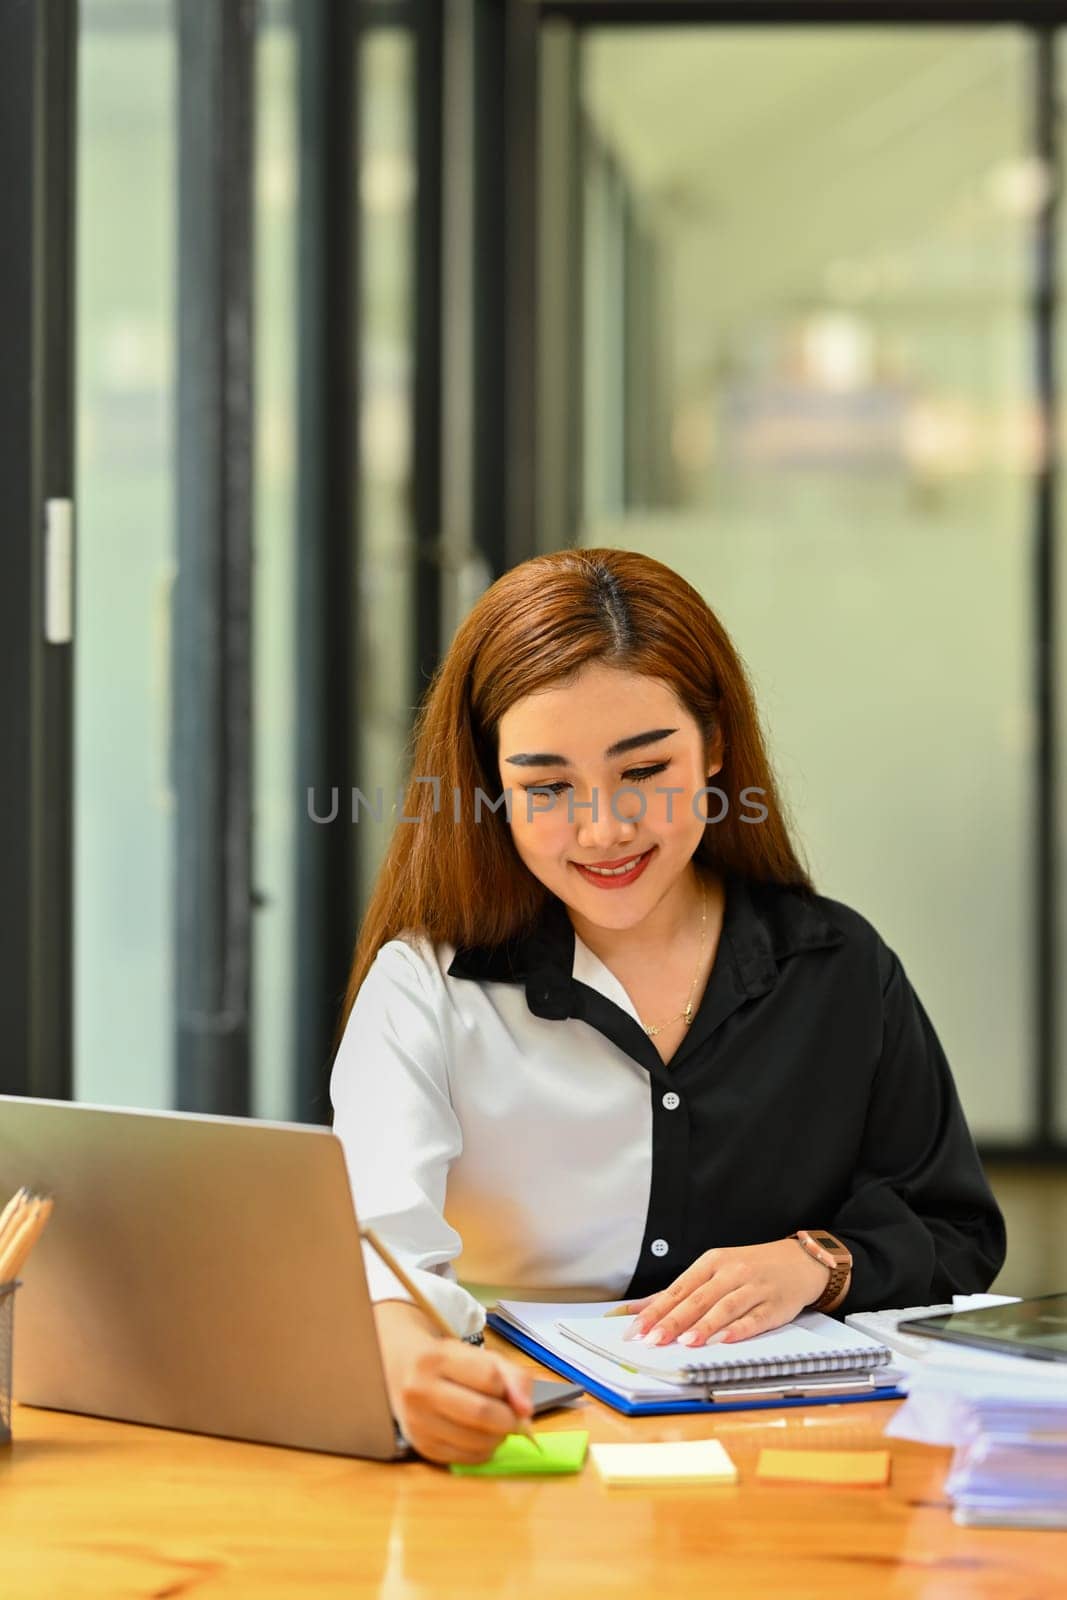 Smiling female employee sitting in front of laptop and writing on sticky notes.